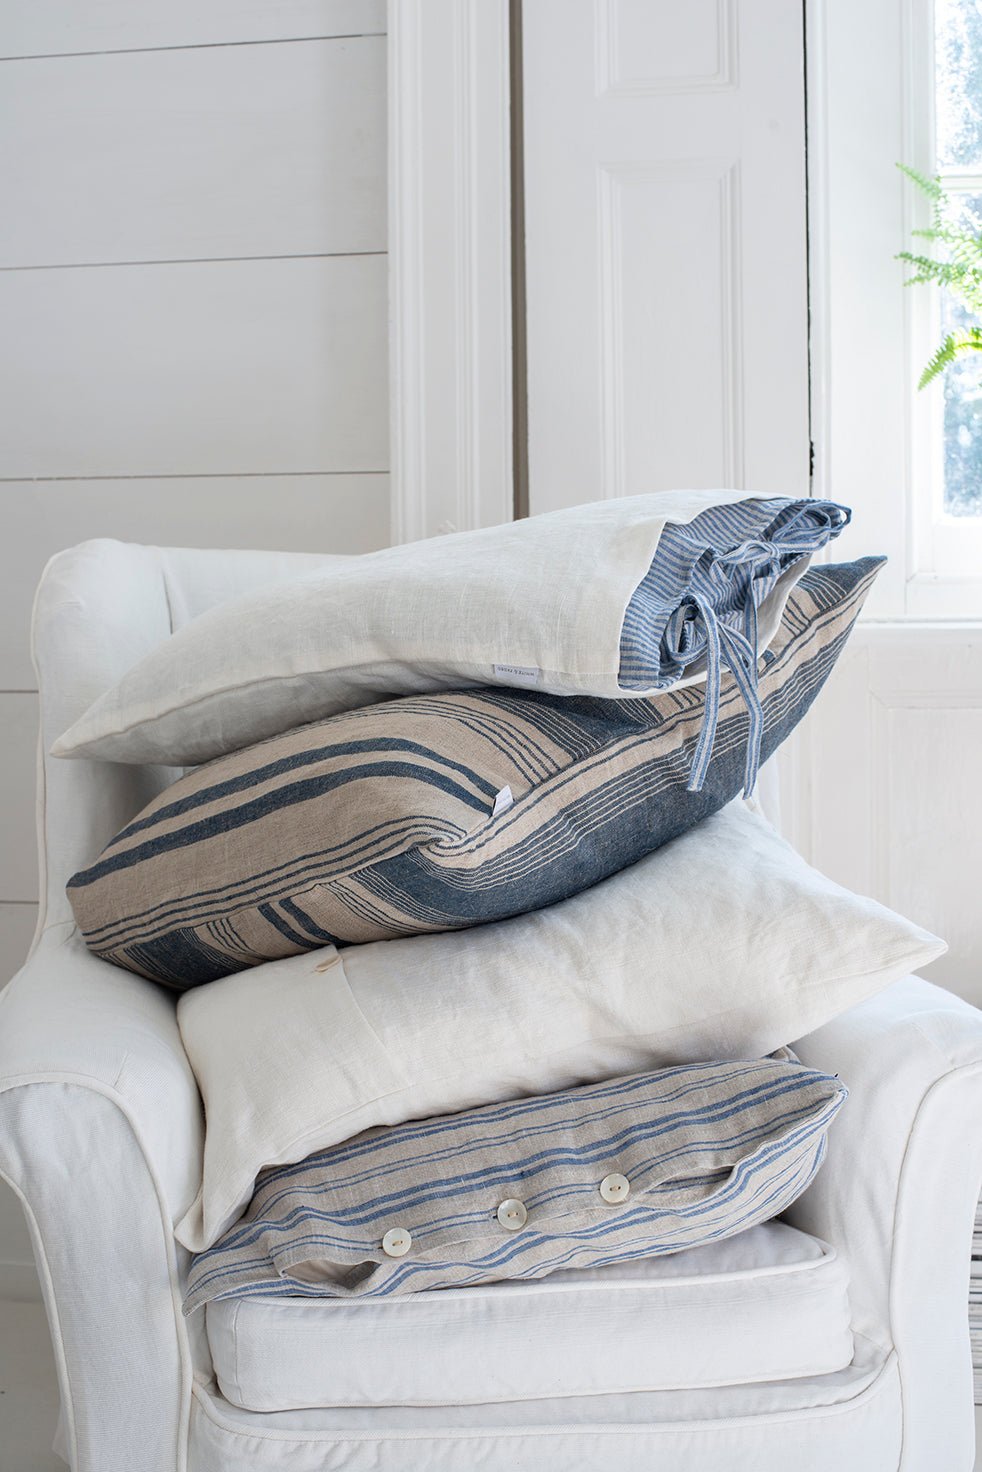 Home-Spun Linen Blue + Greige Stripe Pillowcase with Shell Buttons - White & Faded